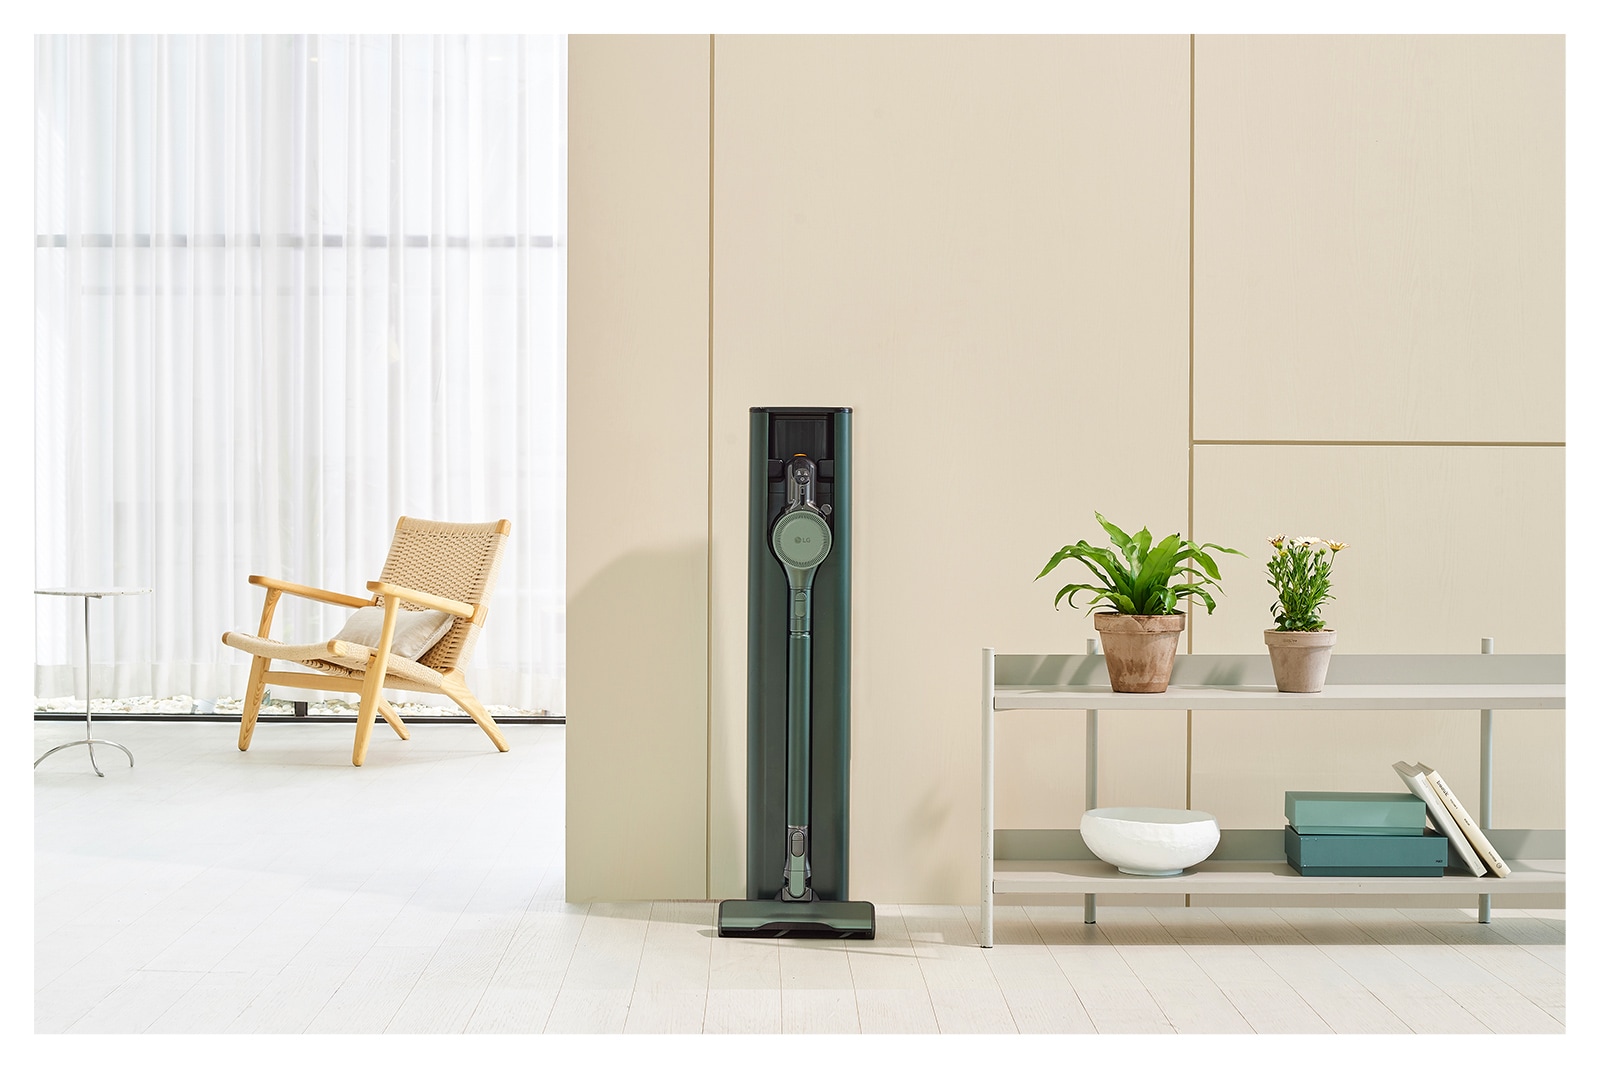 Image of calming green colour LG CordZero All-in-One Tower placed in a modern living room.